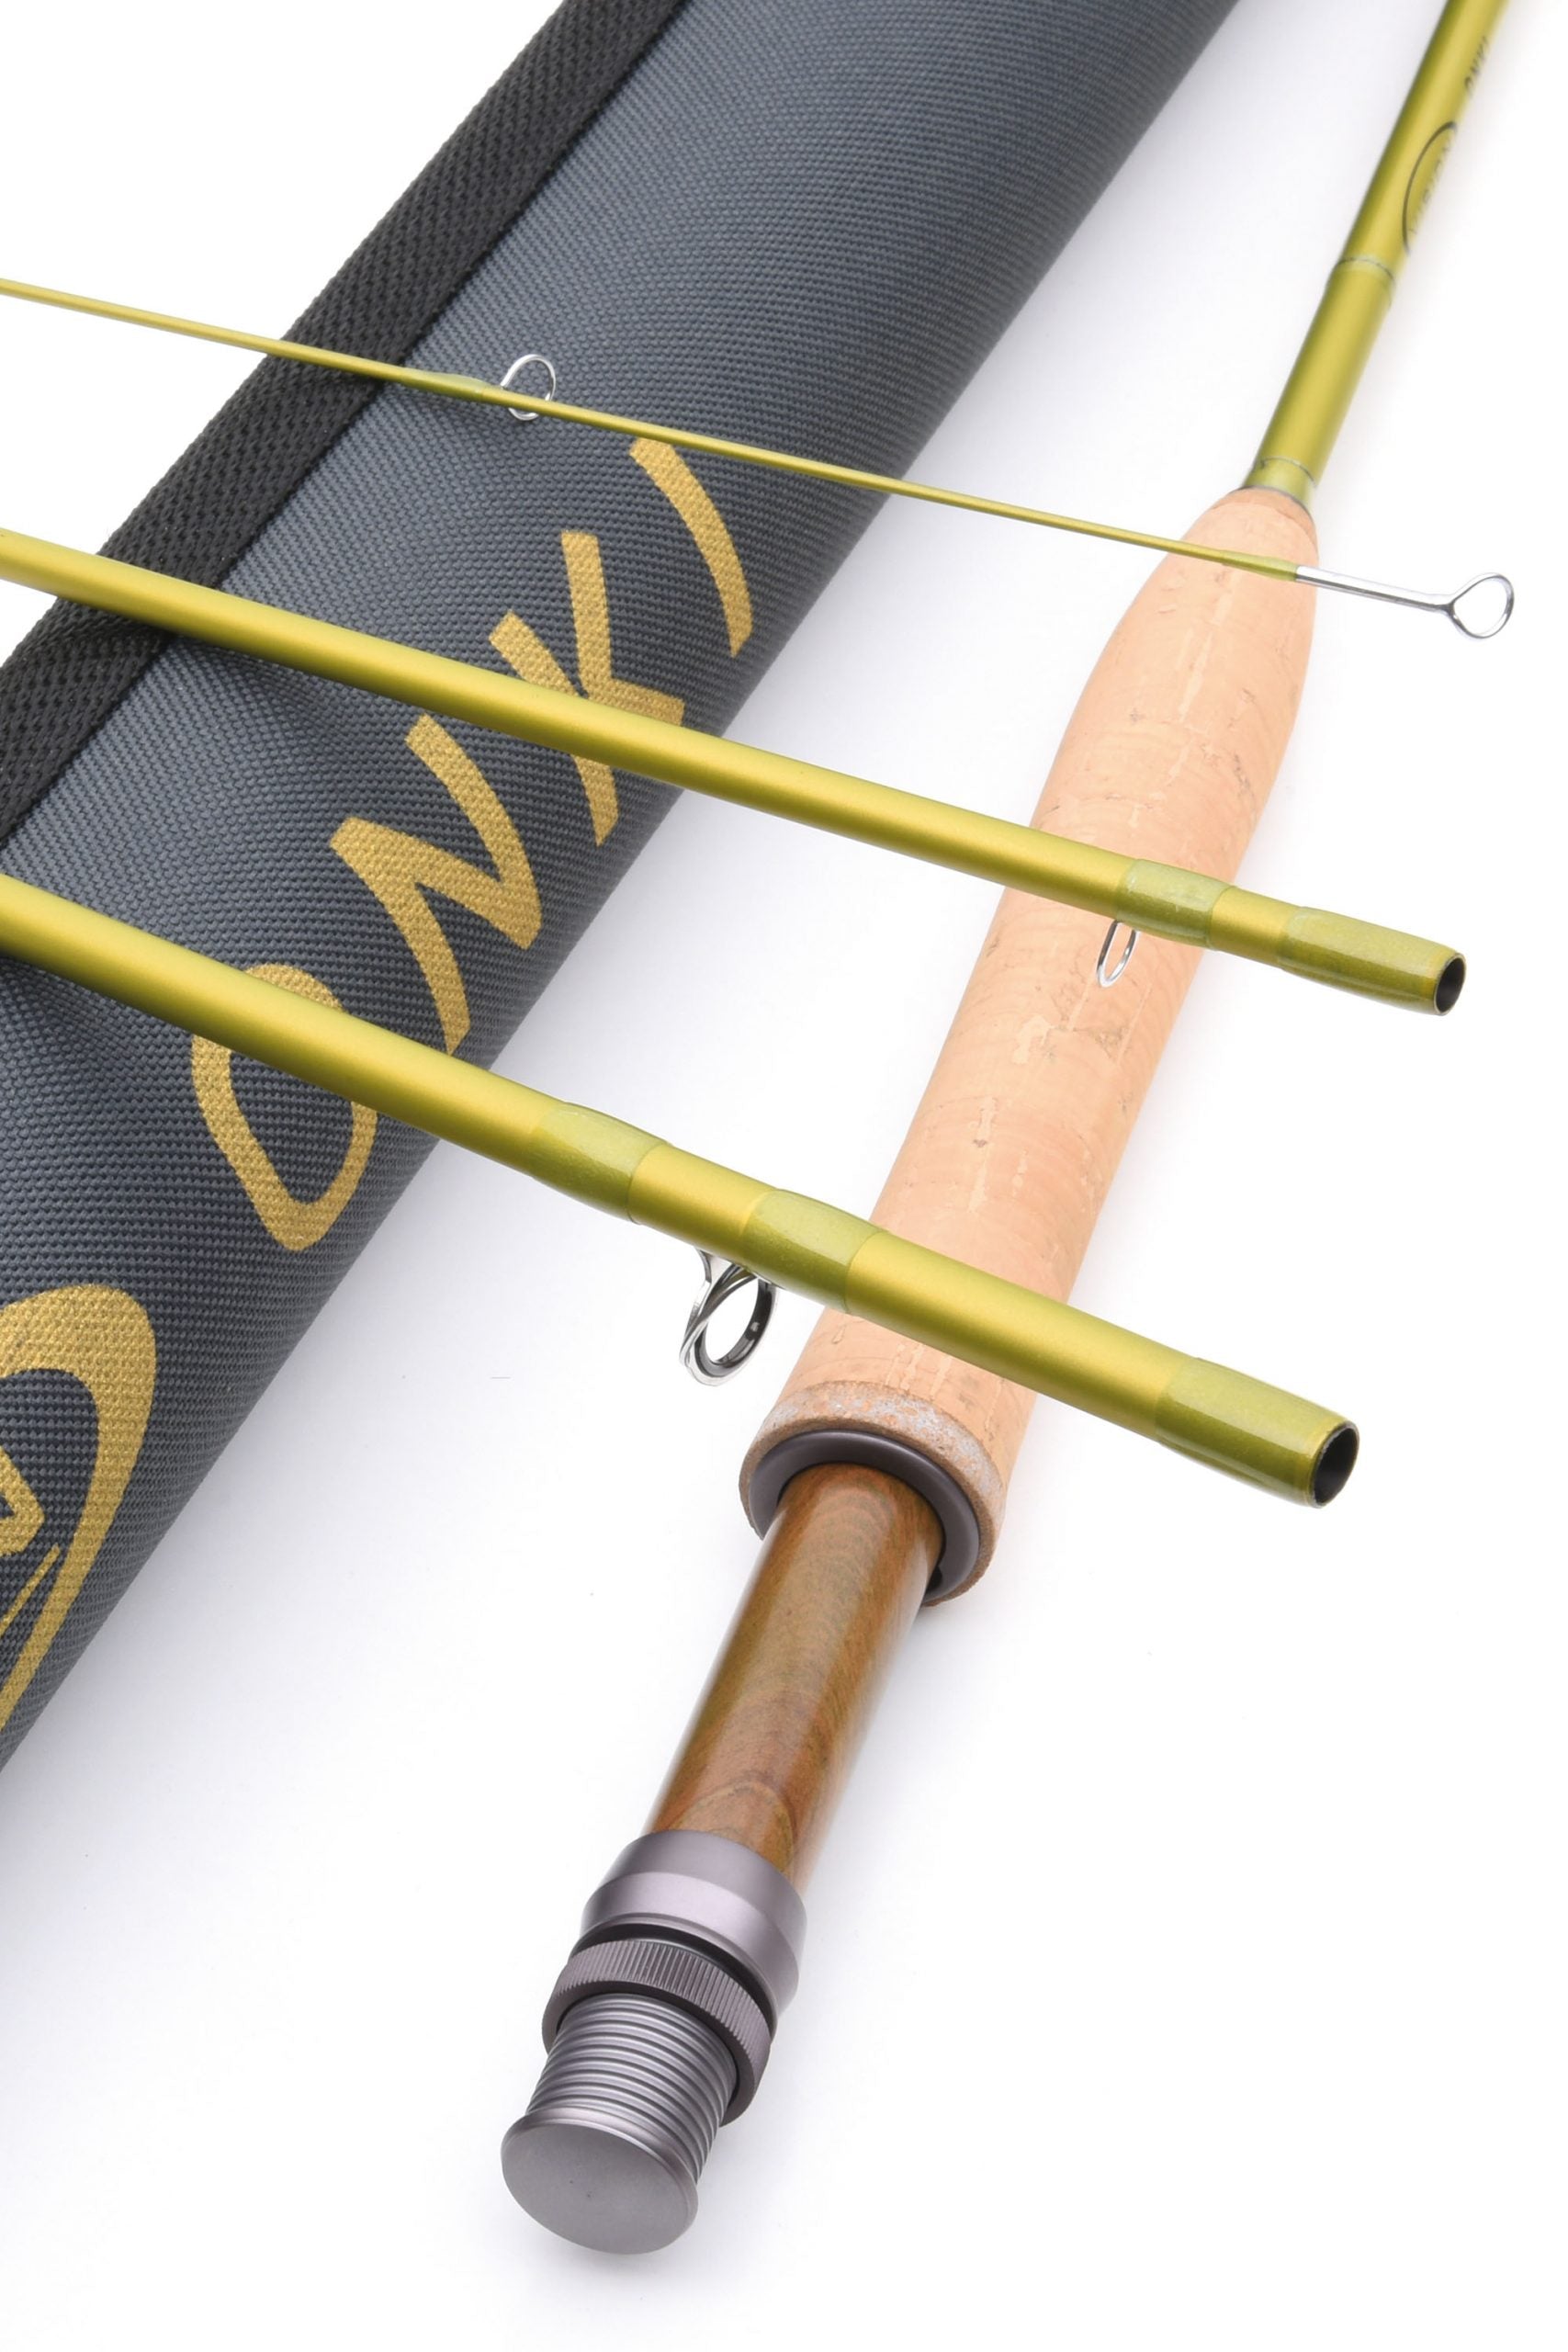 VISION ONKI FLY RODS